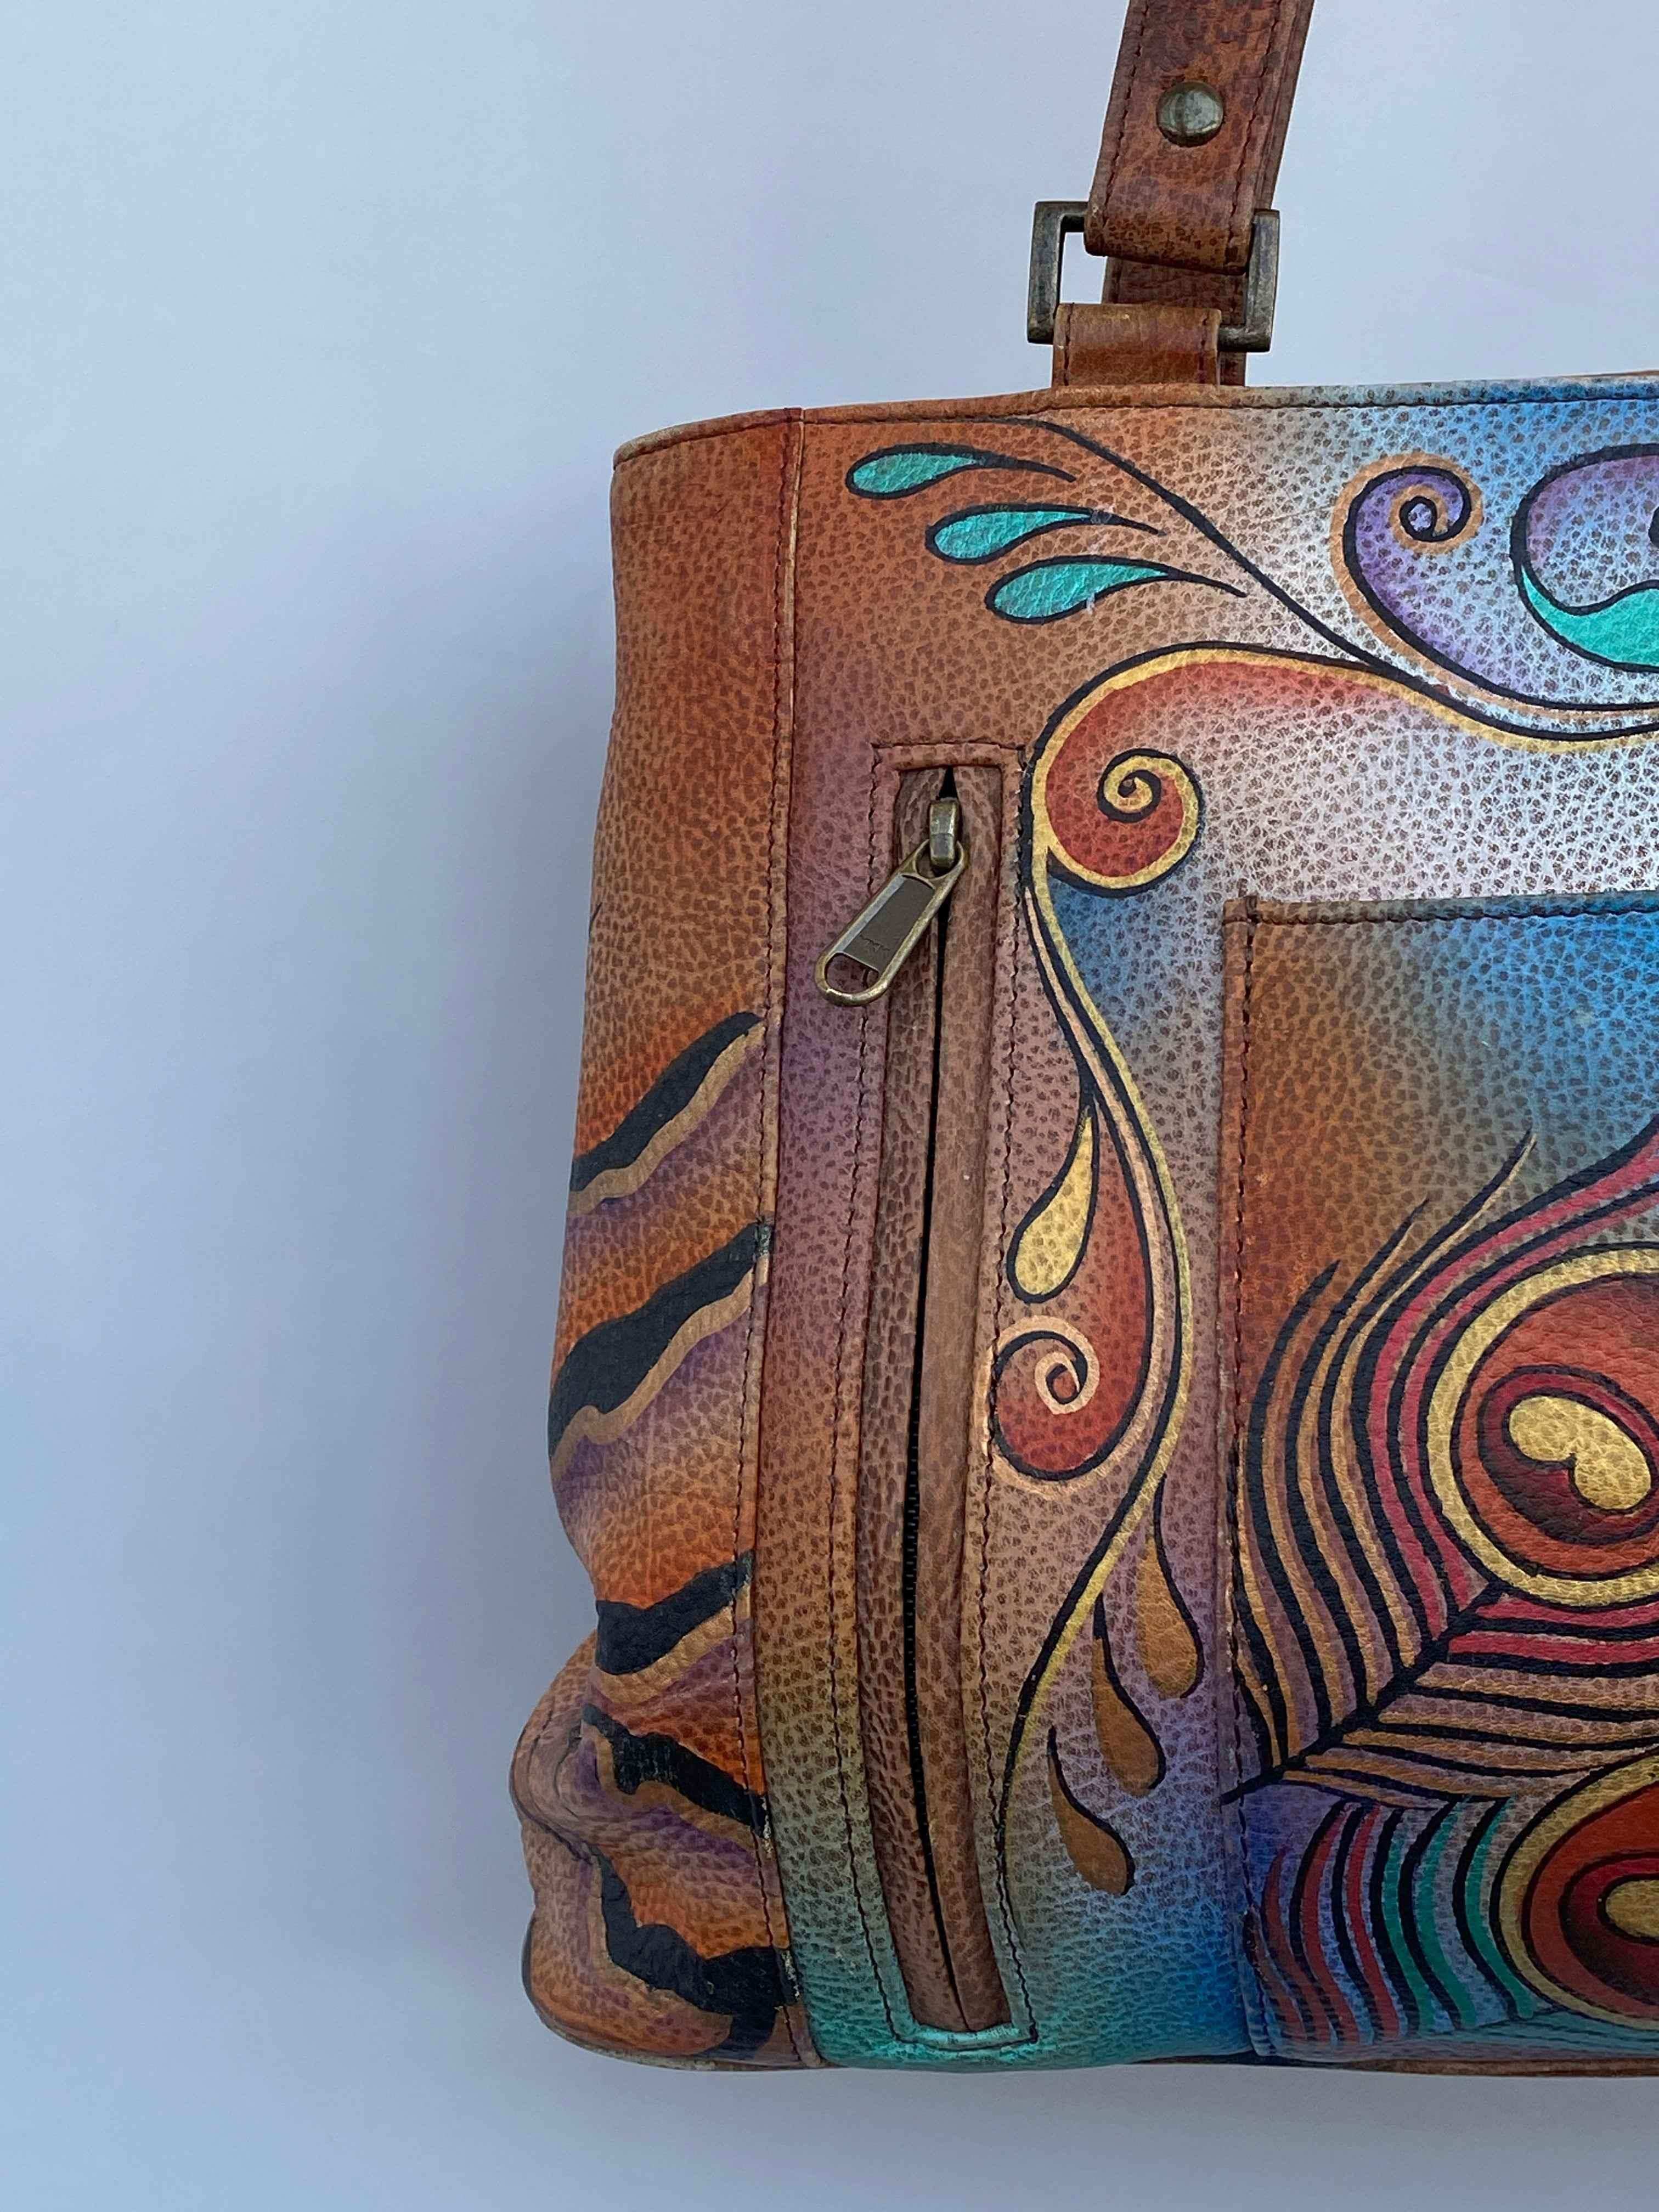 Artisanal Delights: Painted Leather Bags and Purses - Etsy | Painted  leather bag, Painted handbag, Handpainted bags